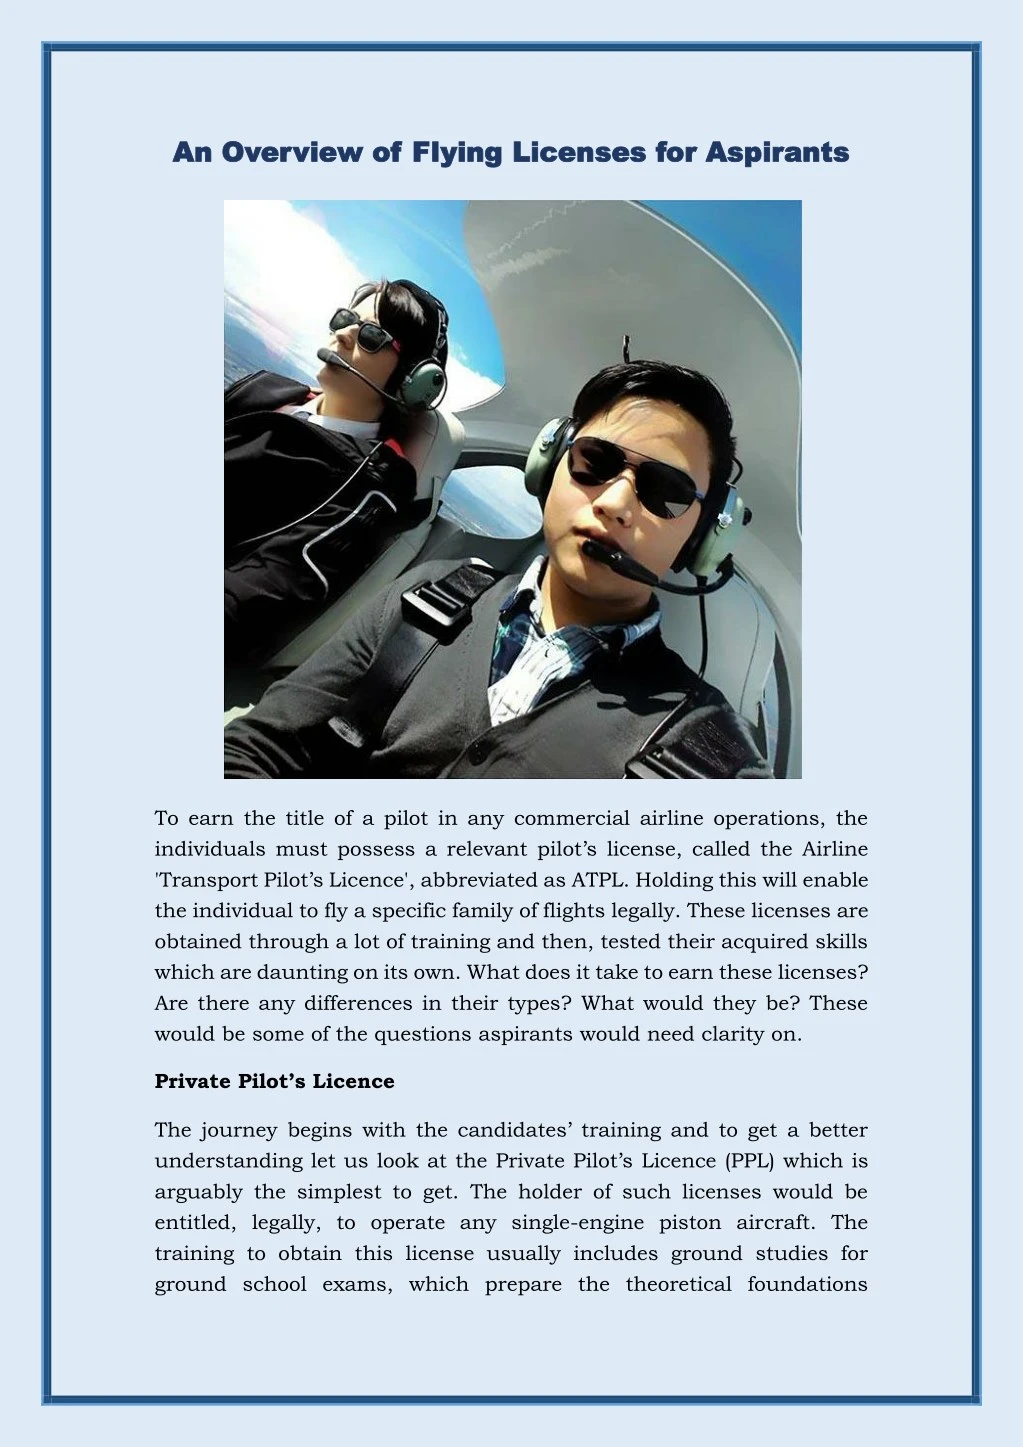 an overview of flying licenses for aspirants